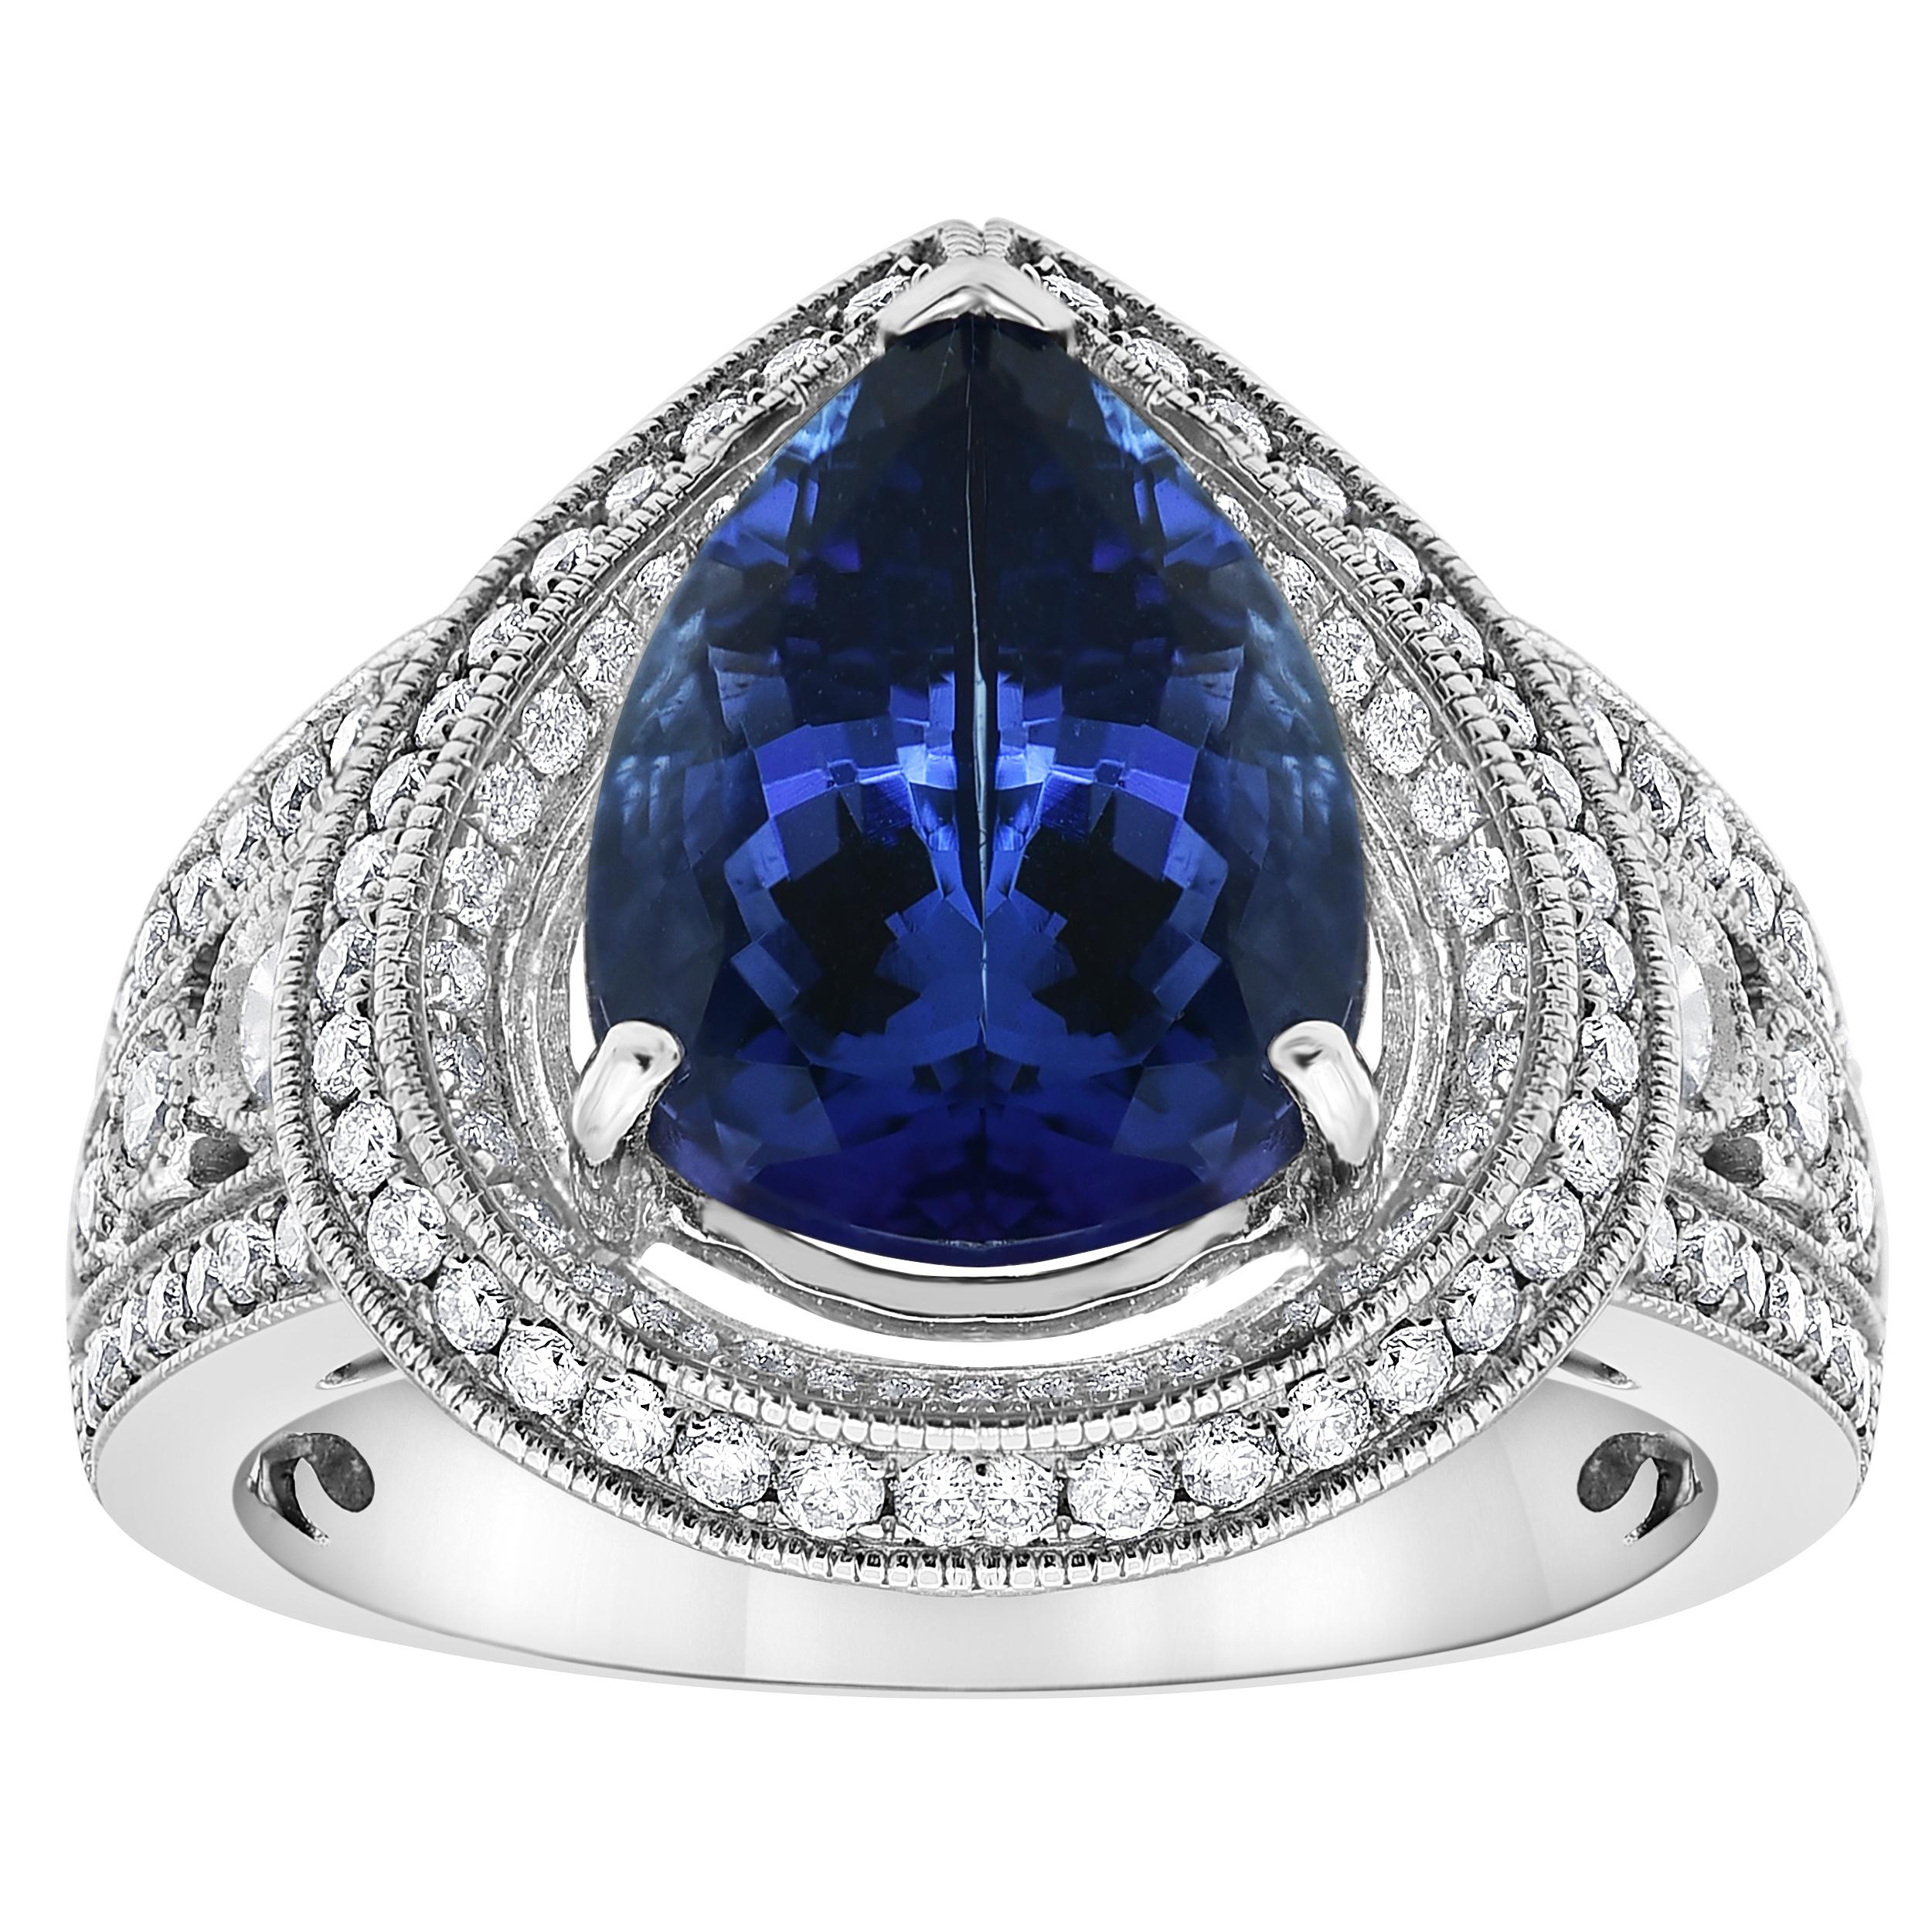 Complement her evening looks with this alluring fashion ring. Crafted in 14K White Gold, this style features an 8.85 Carat Pear-cut bright blue Tanzanite wrapped in a frame of shimmering 1.15 Carat Diamonds Color with H-I, Clarity SI1-I1. Buffed to